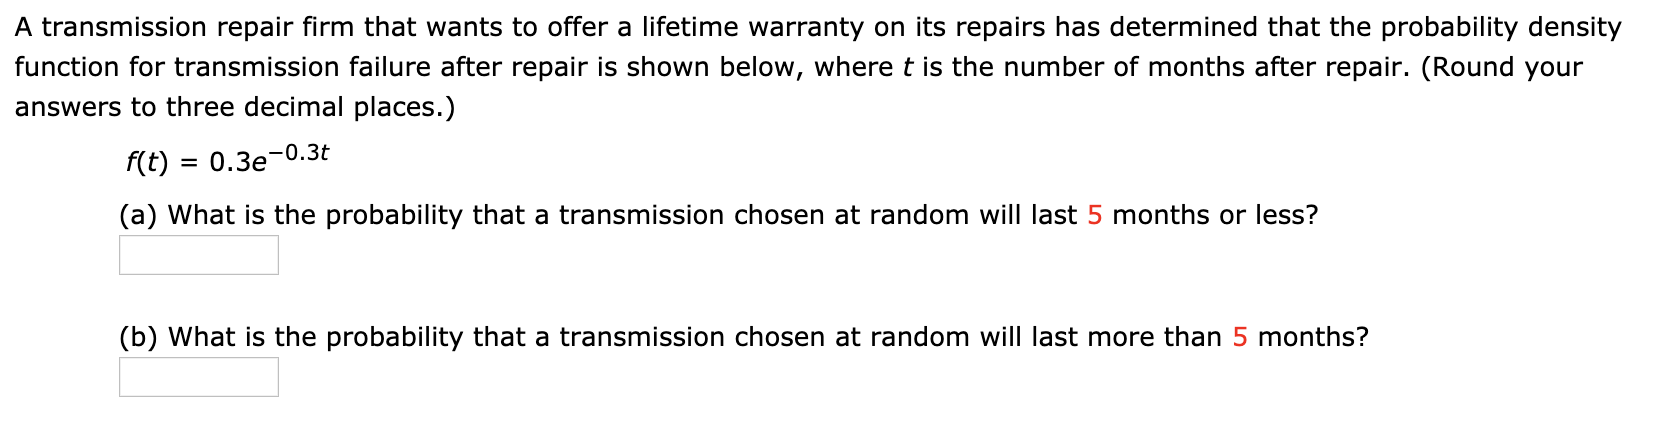 A transmission repair firm that wants to offer a lifetime warranty on its repairs has determined that the probability density
function for transmission failure after repair is shown below, where t is the number of months after repair. (Round your
answers to three decimal places.)
f(t) = 0.3e-0.3t
(a) What is the probability that a transmission chosen at random will last 5 months or less?
(b) What is the probability that a transmission chosen at random will last more than 5 months?
